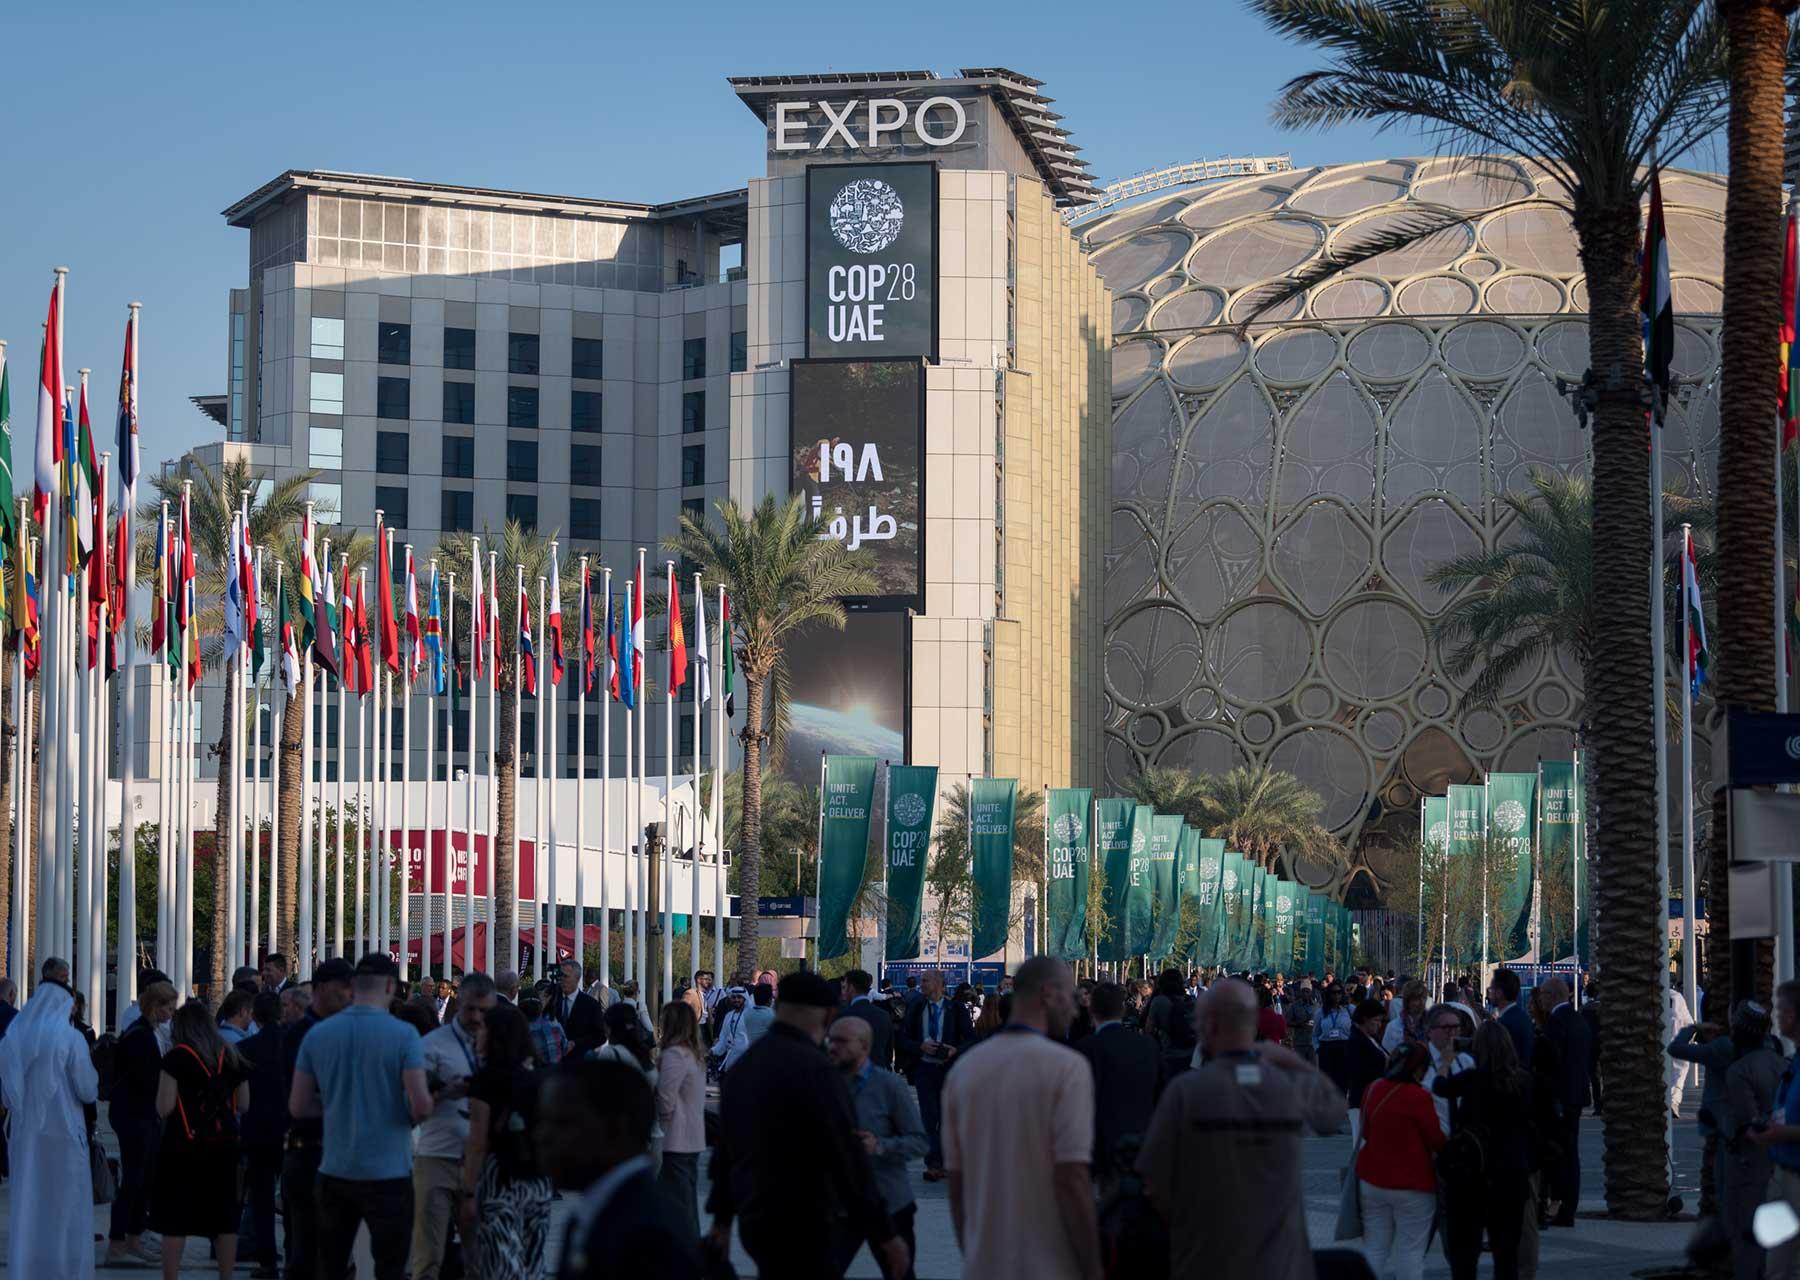 People from all over the world gather at Expo City in Dubai, venue of United Nations climate summit COP28. Photo: LWF/A. Hillert